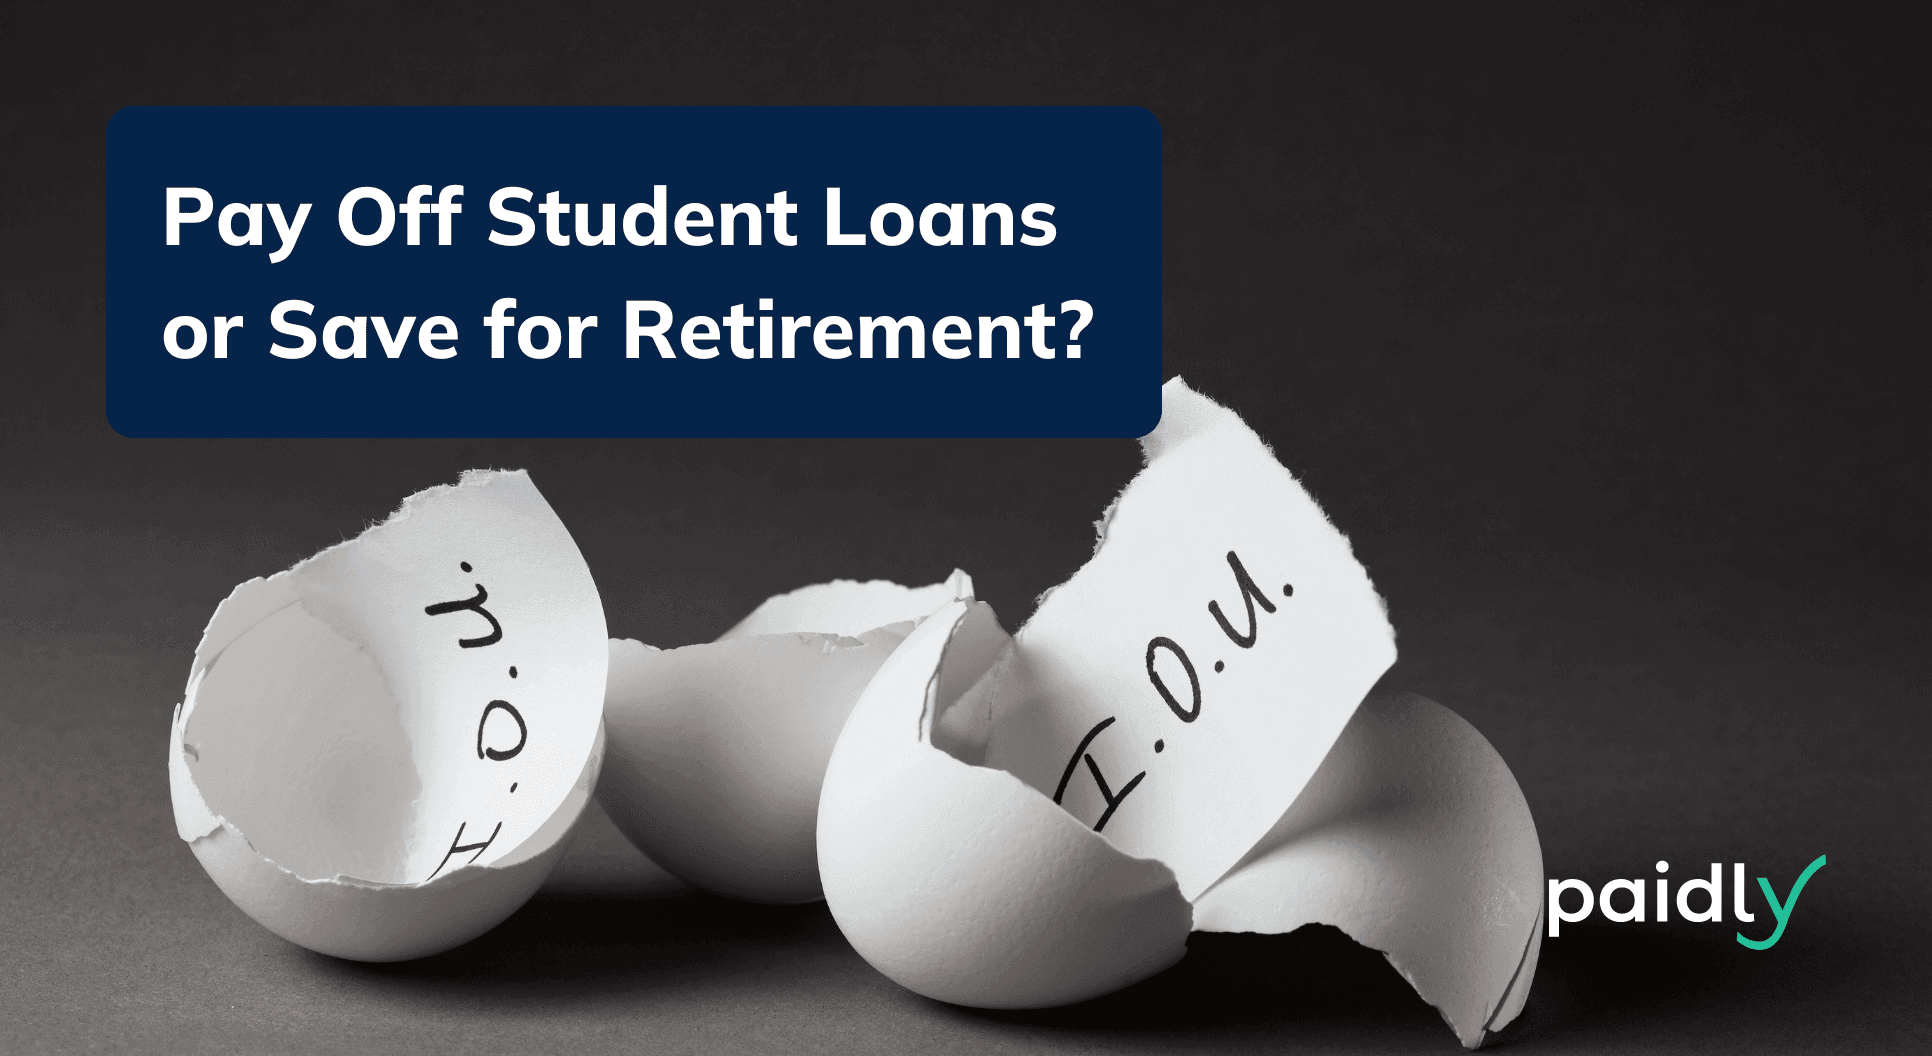 Pay off Student Loans or Save for Retirement?